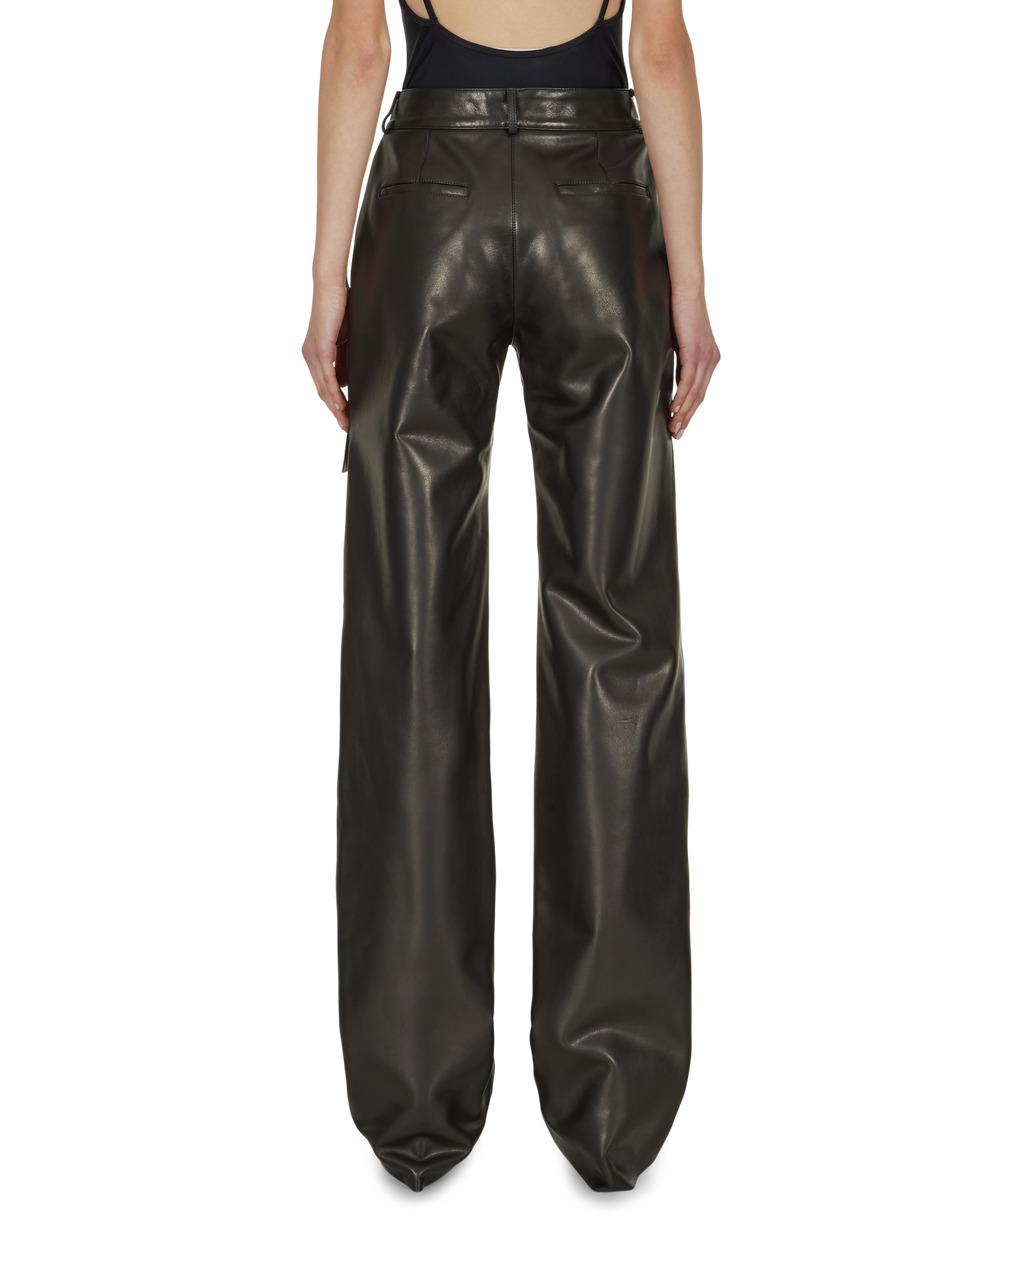 LEATHER PANT - 5